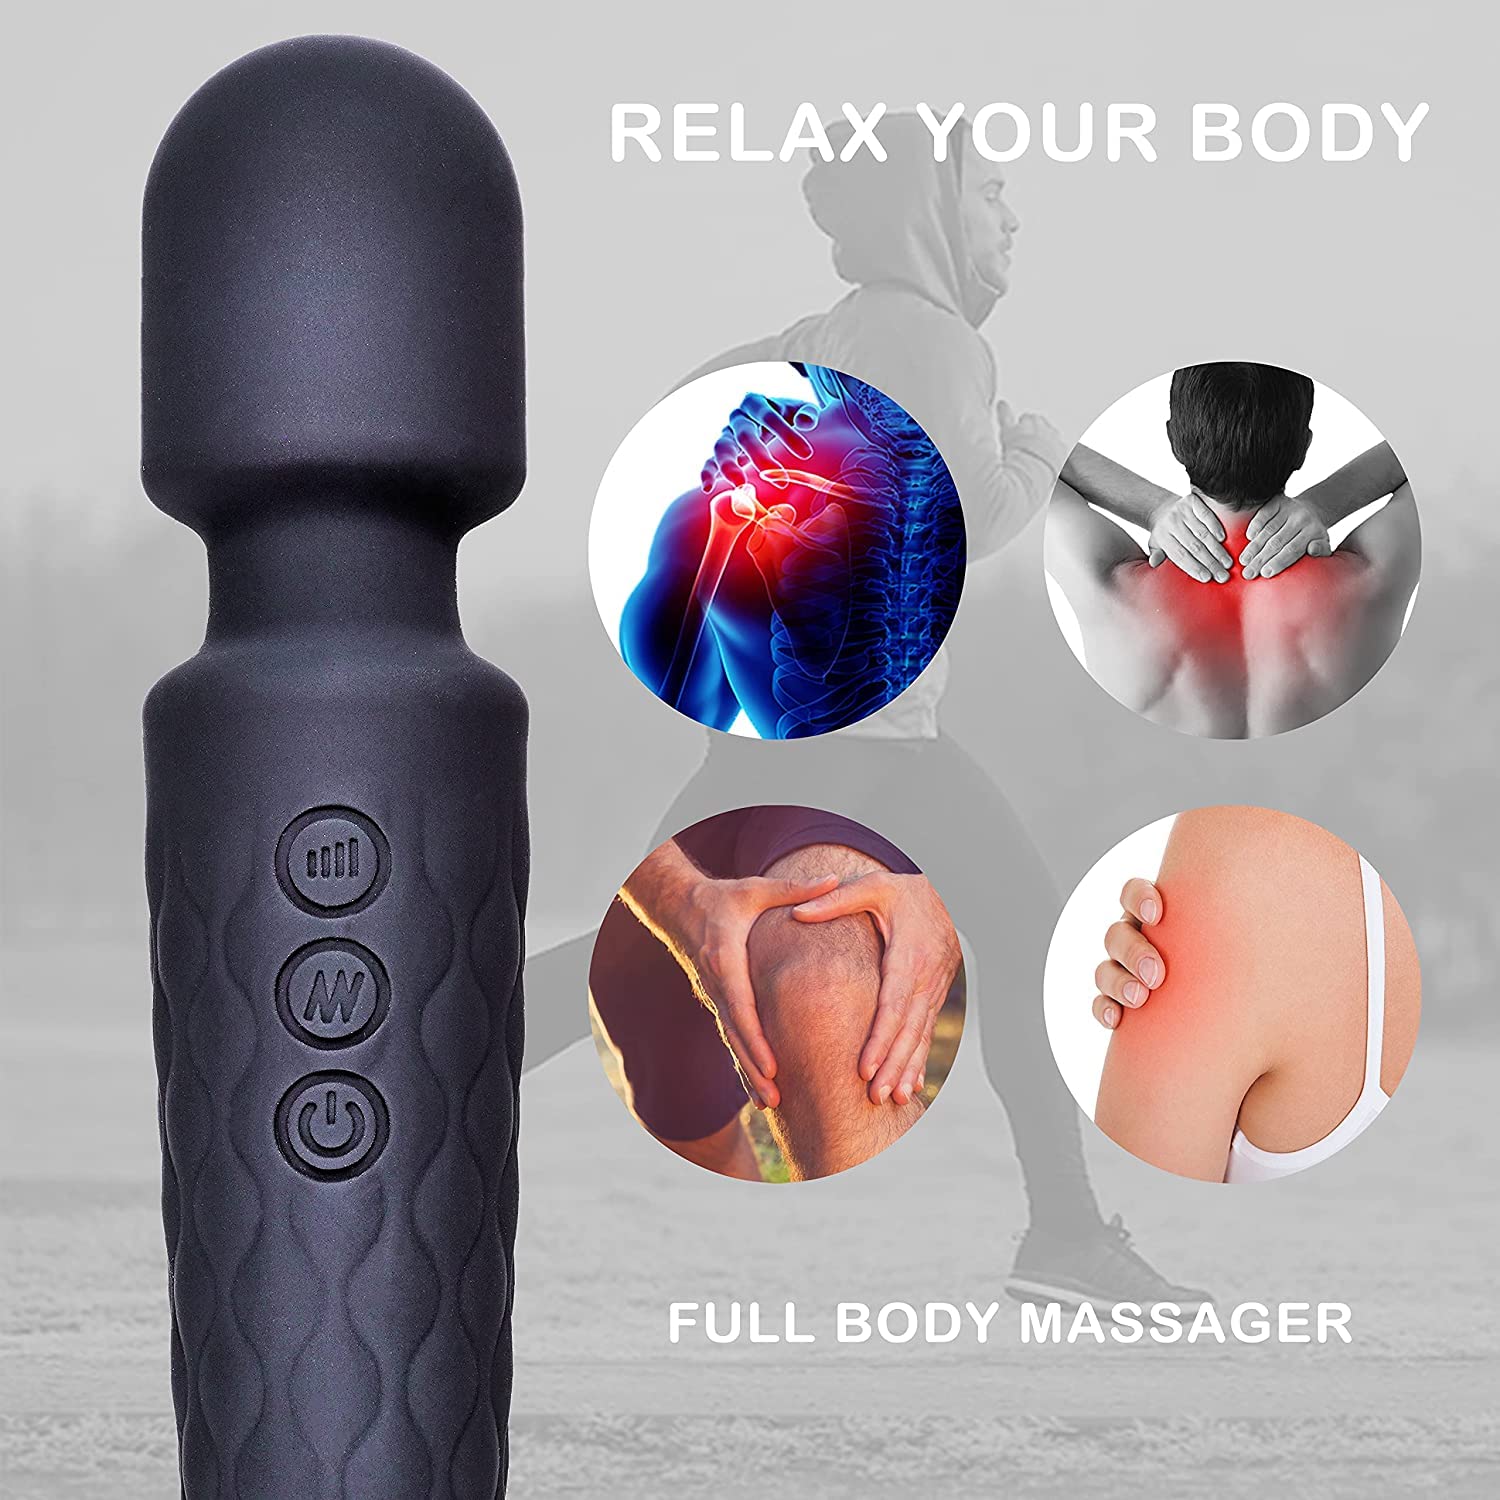 Dr. Sanaya Massager Rechargeable Body Massager for Women and Men / Handheld Waterproof Vibrate Wand Massage Machine with 20 Vibration Modes - 8 Speeds, Battery Powered, Full Body Massager Multicolor…